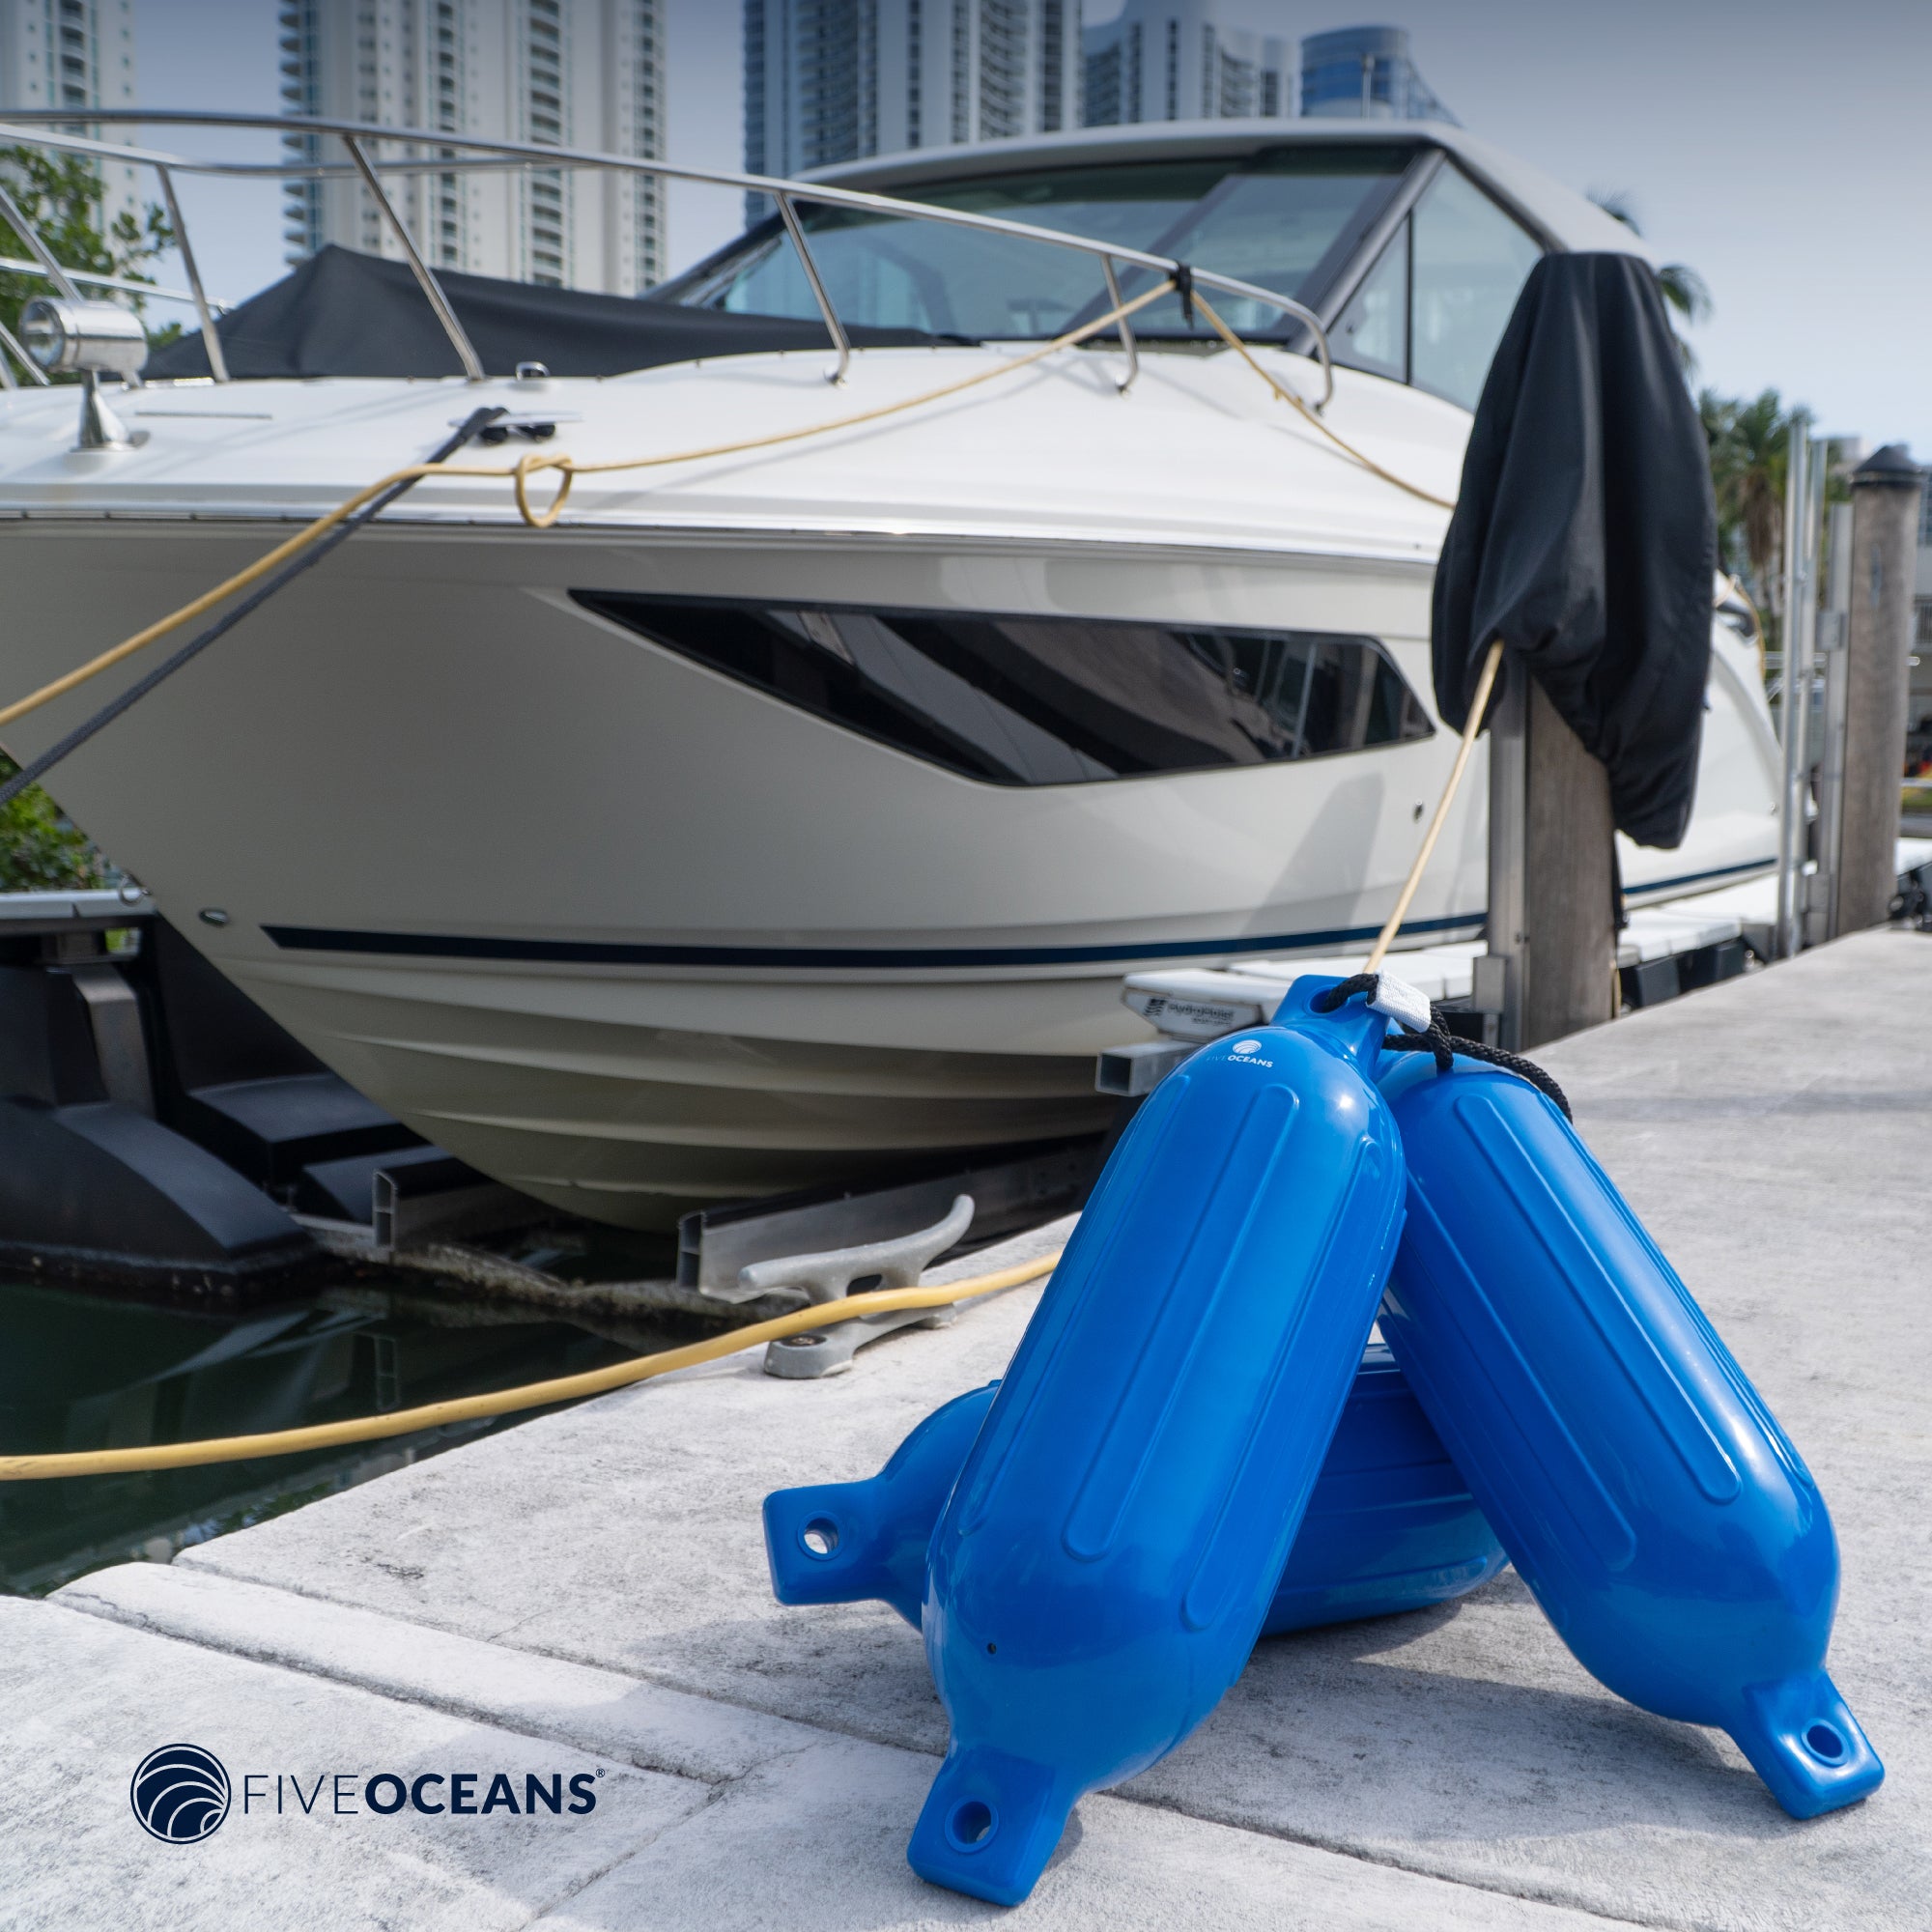 five oceans boat bumpers for docking